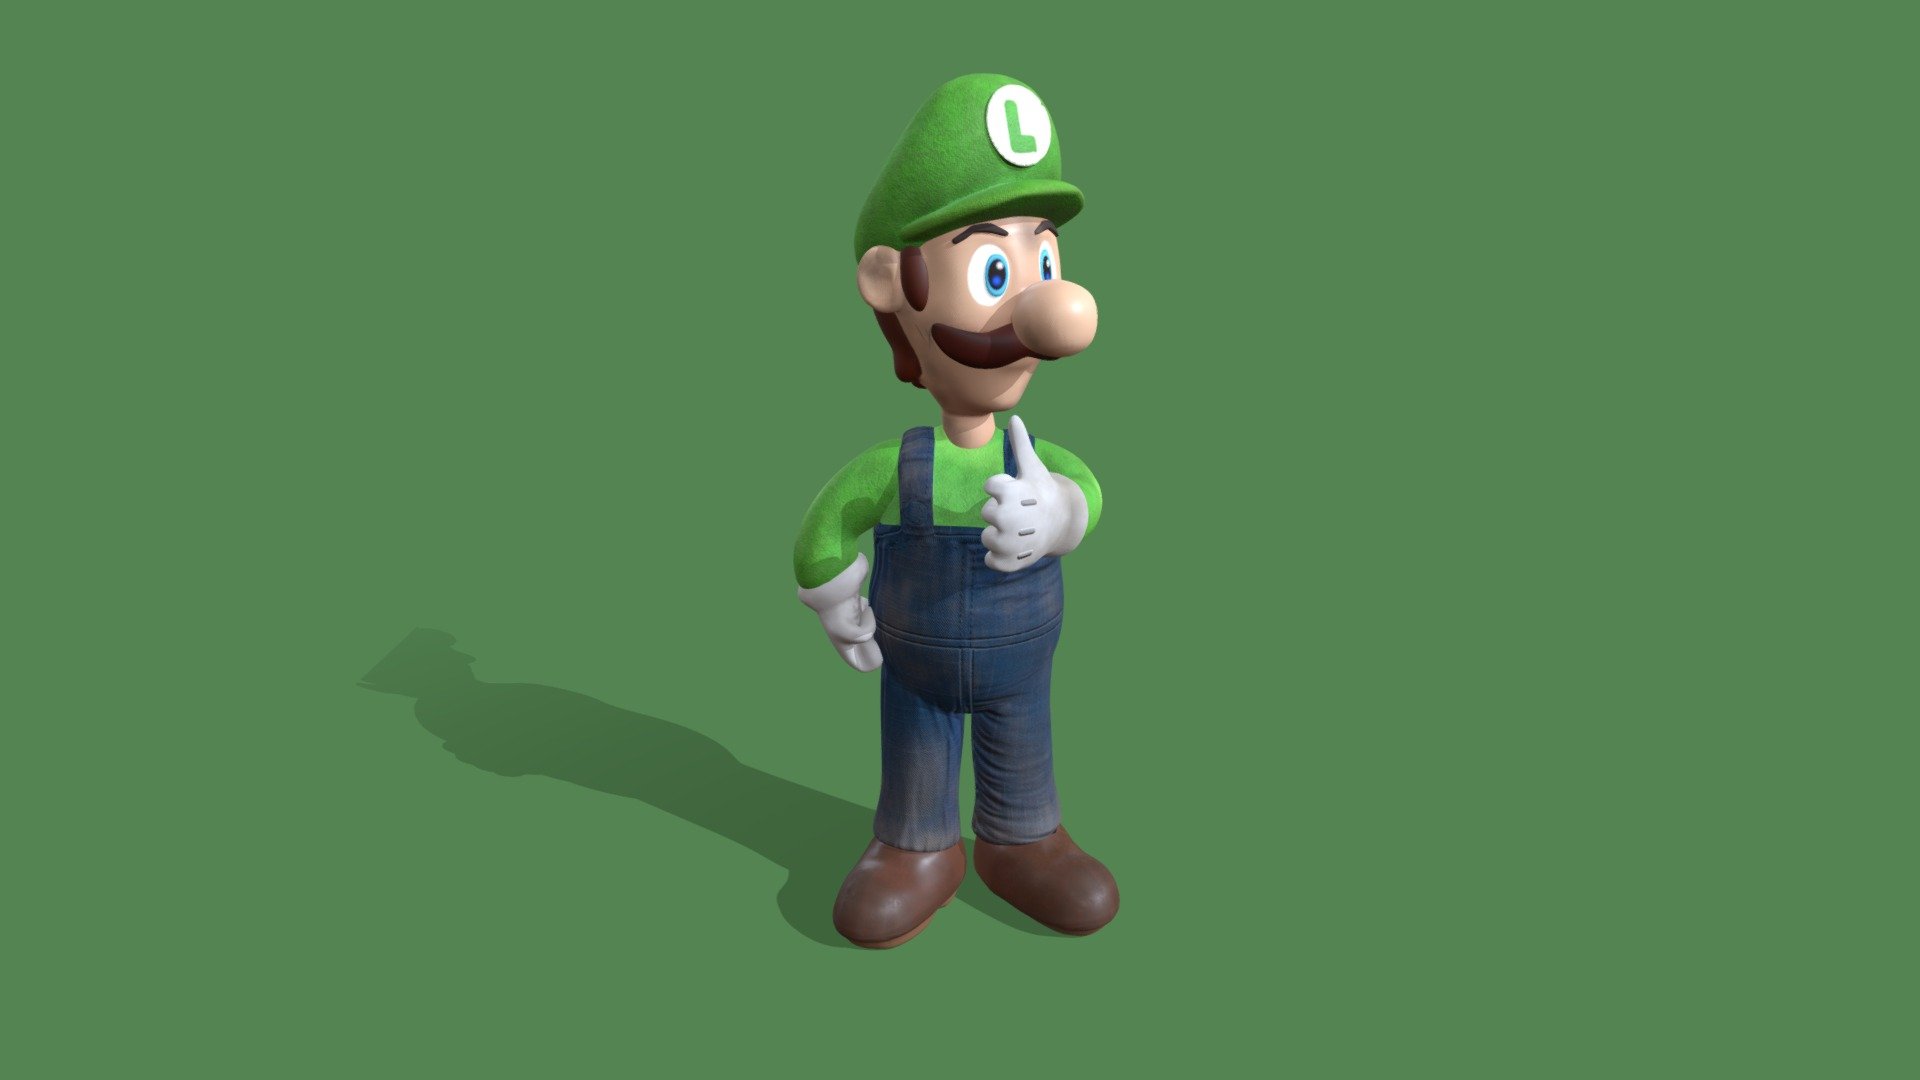 was a school project ant it was really fun to do.  the nest thing gonna be a video character more realistique 

all right are deserverd to nintendo
(luigi from nintendo) - luigi bross - 3D model by Anthony Caron (@LttleAnthonio) 3d model